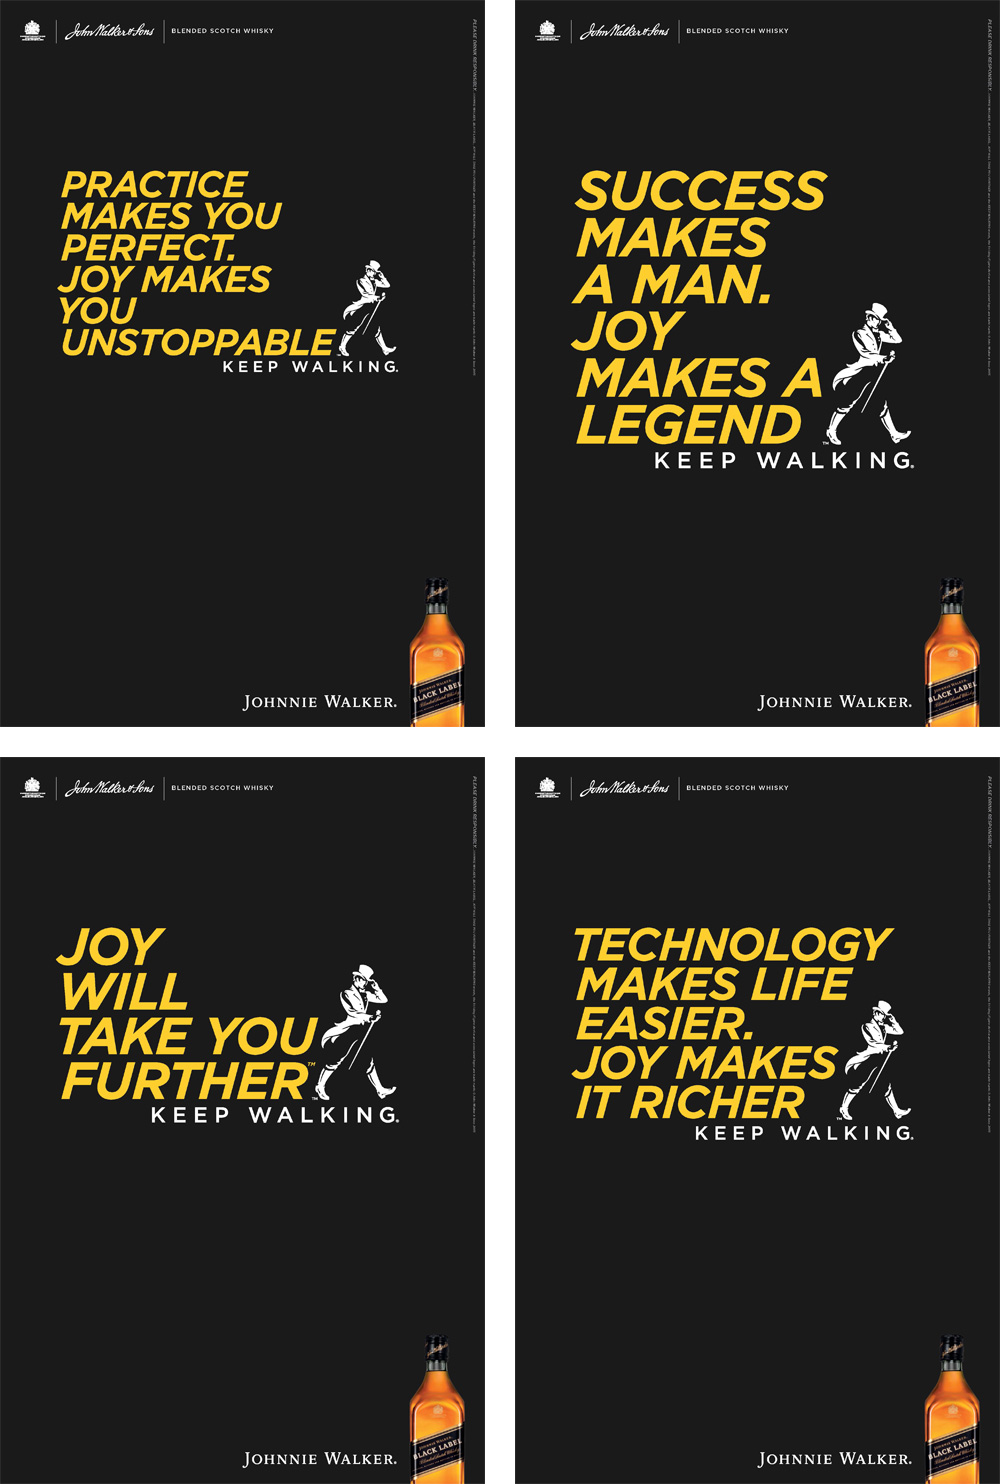 New Logo and Global Campaign for Johnnie Walker by Bloom and Anomaly